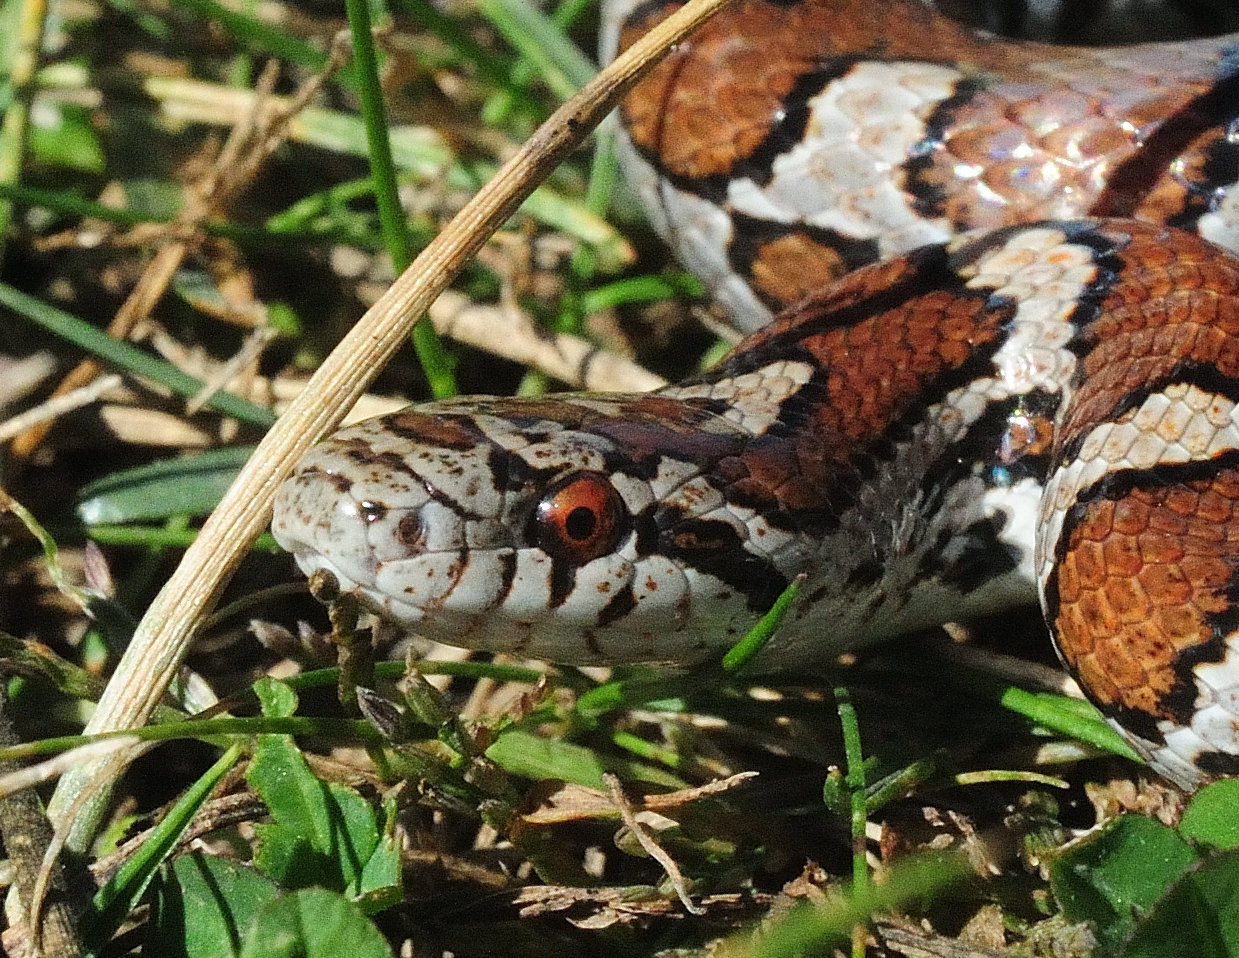 A close-up of a milksnake found in Pike county reveals round pupils that all non-venomous snakes (in our region) share. Milksnakes have smooth (non-keeled) scales. A “Y” shaped marking is on top of the head, behind the eyes, of this individual.